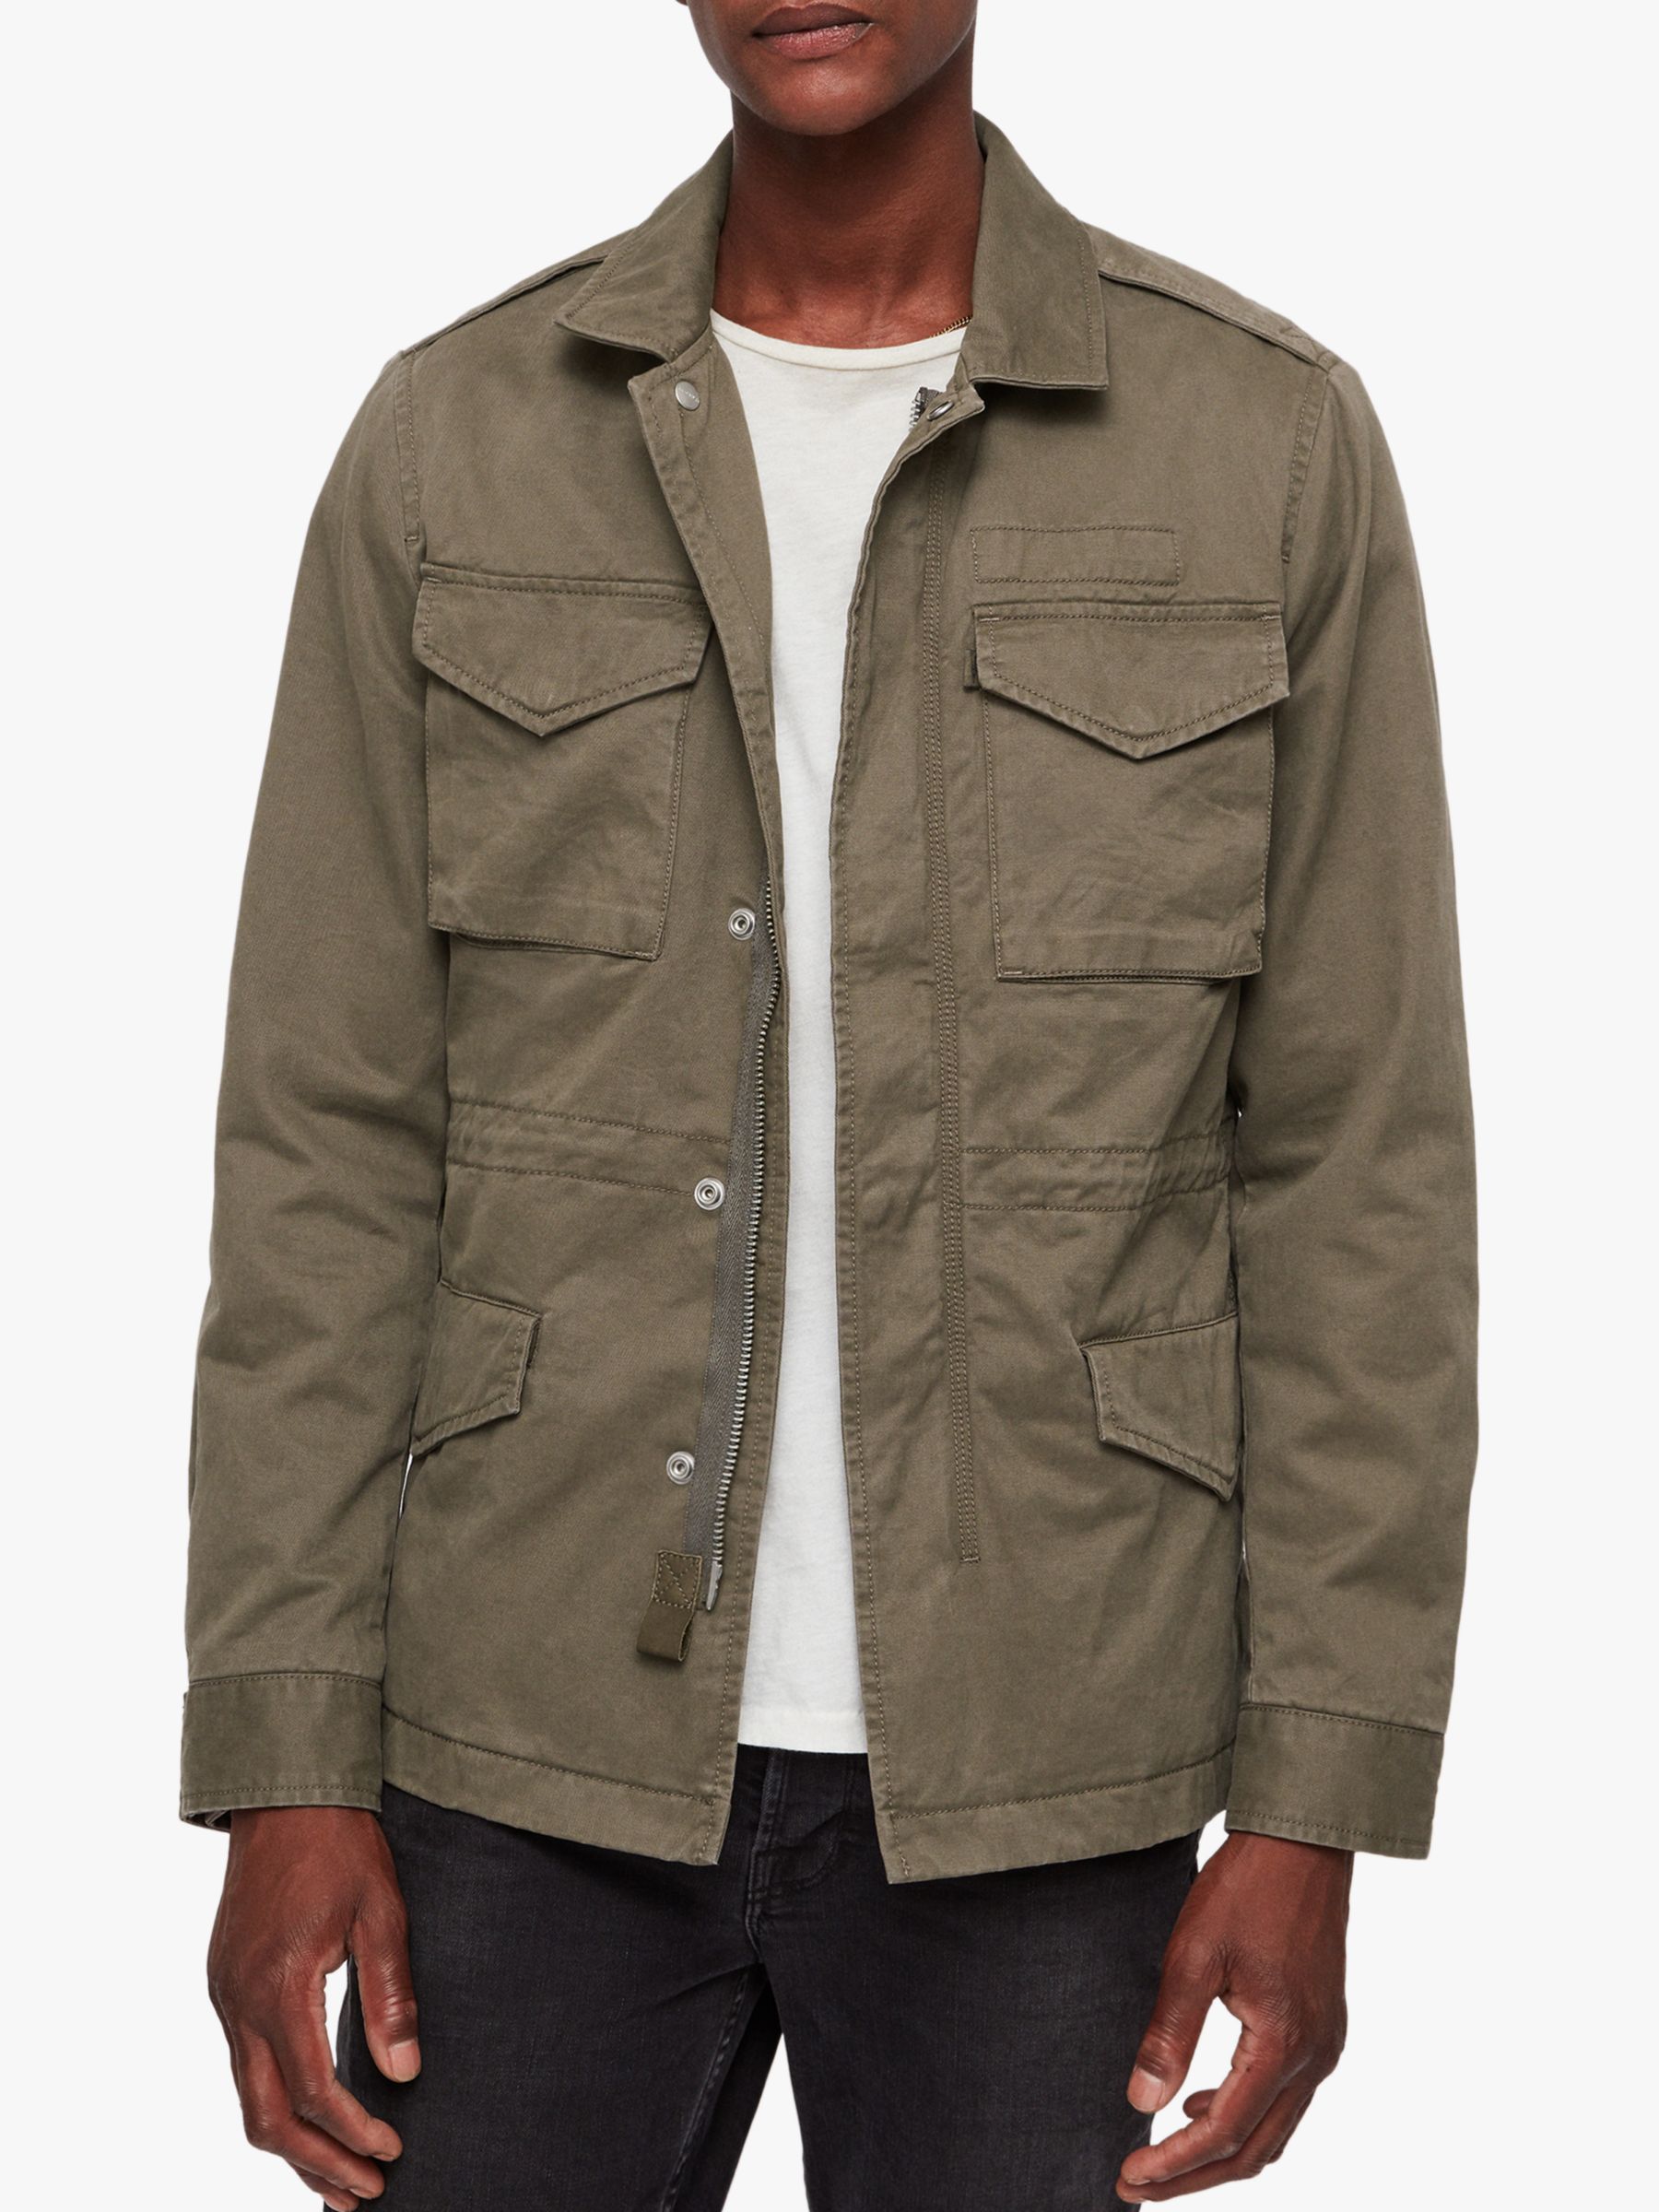 AllSaints Cote Military Jacket, Dusty Olive at John Lewis & Partners